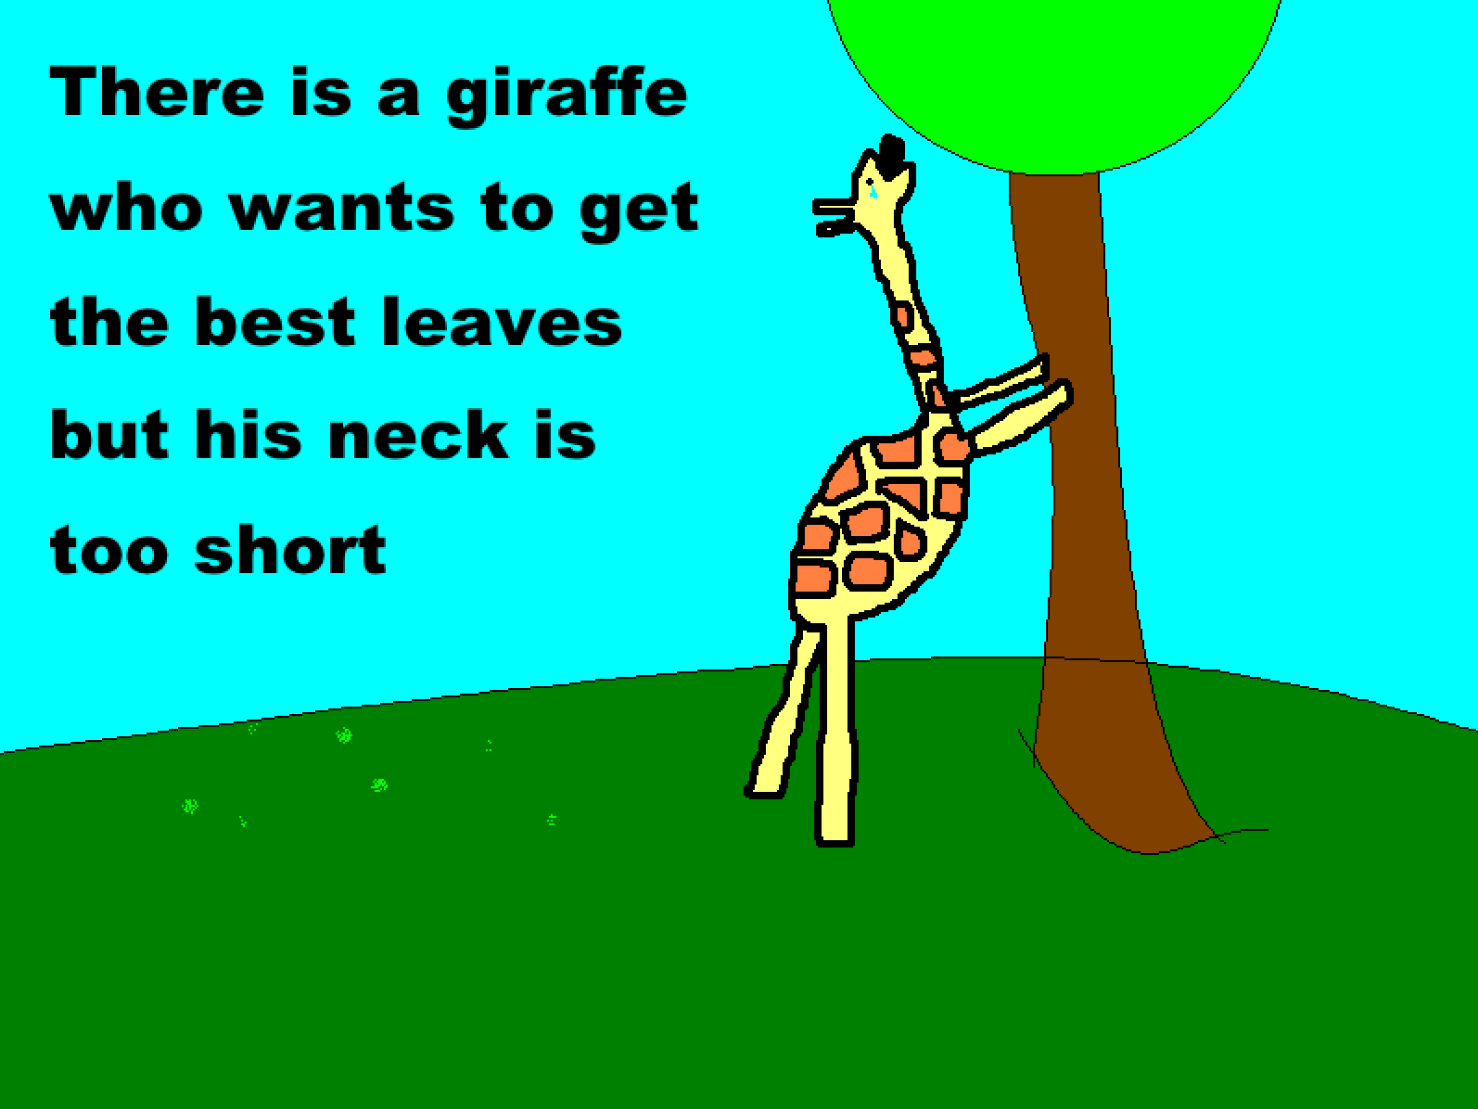 There is a giraffe who wants to get the best leaves but its neck is too short